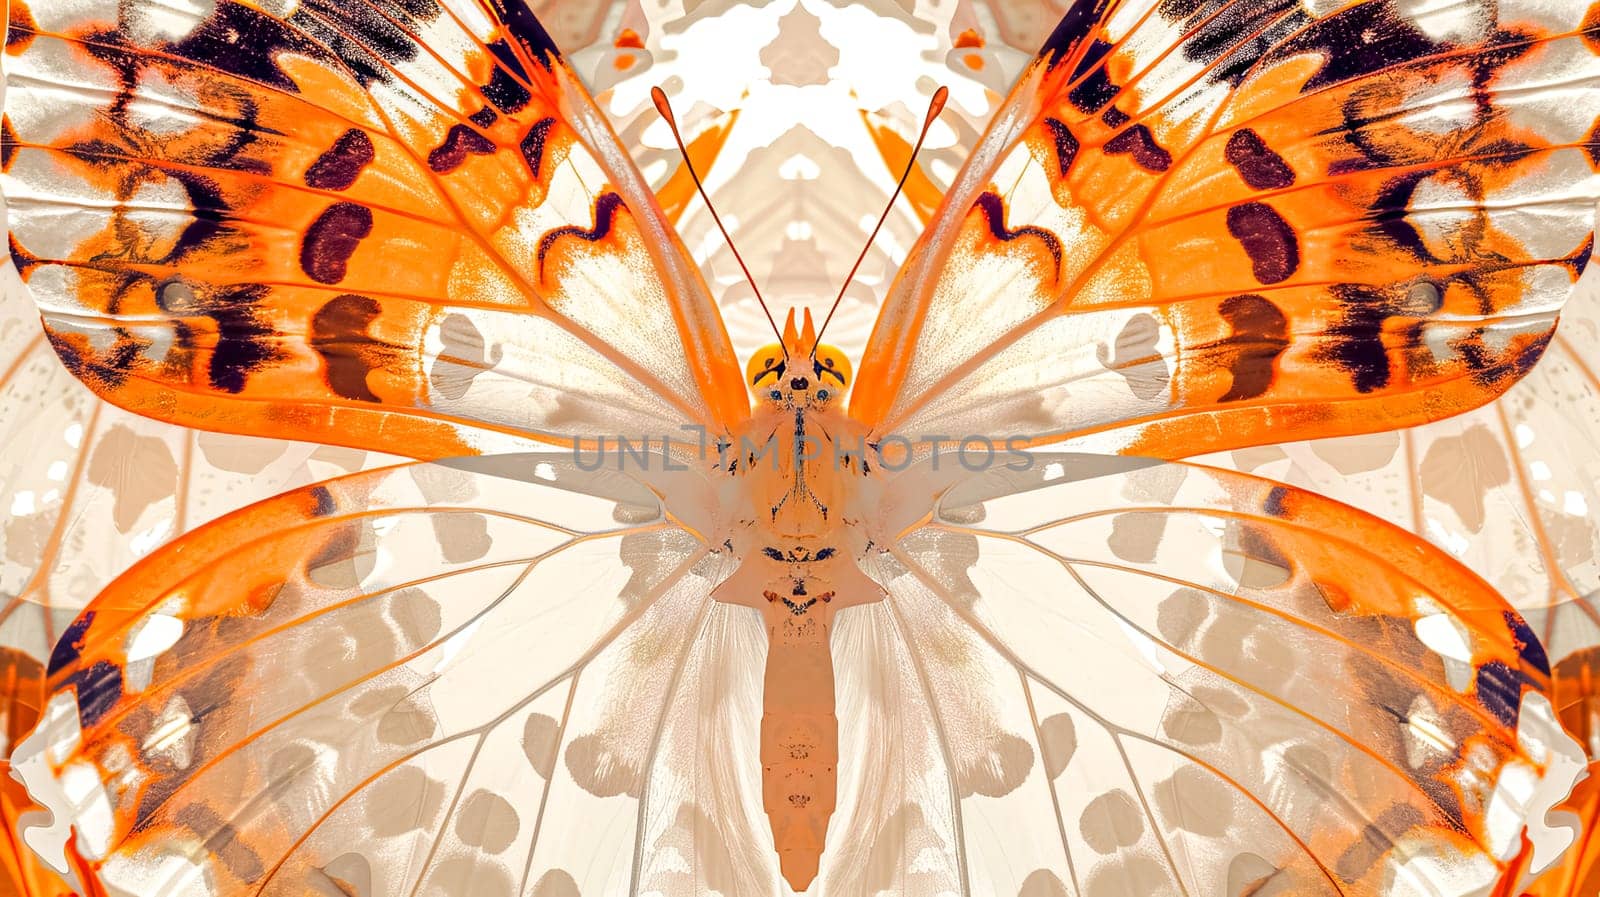 Abstract butterfly wing pattern with warm tones and symmetrical design by Edophoto